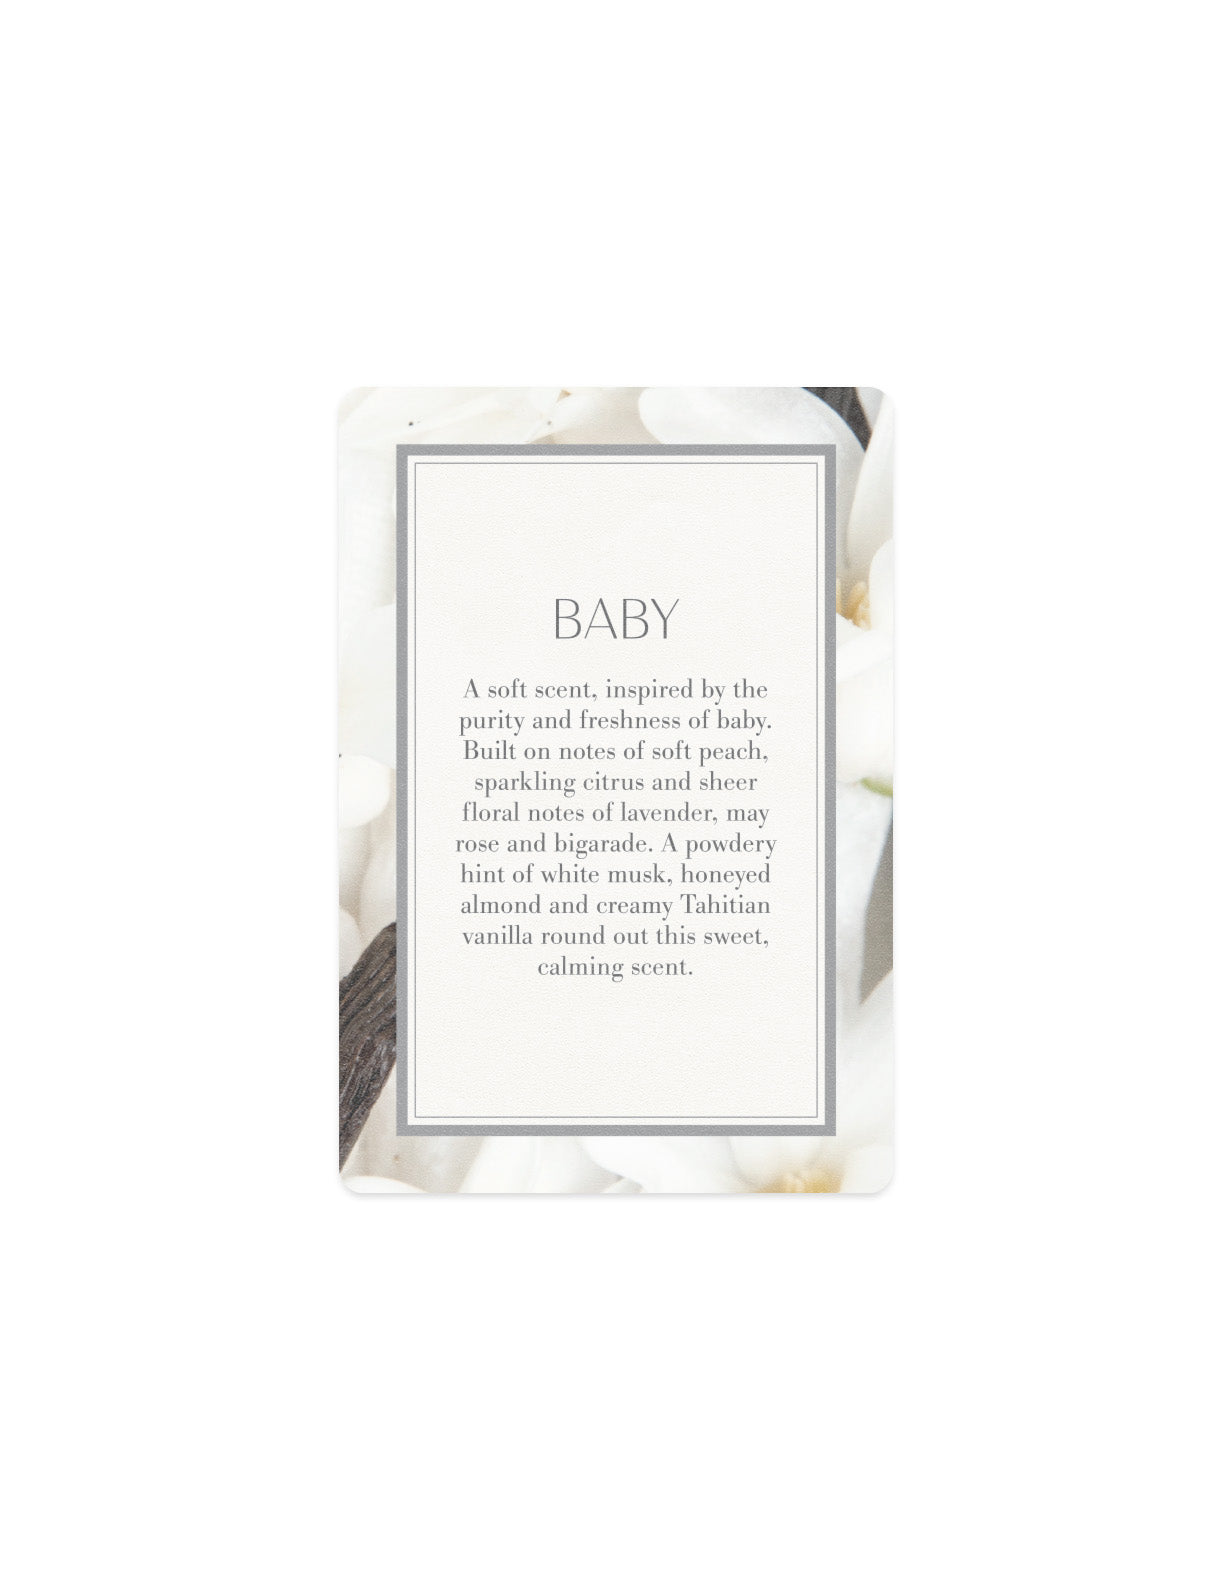 Scented Card - Baby